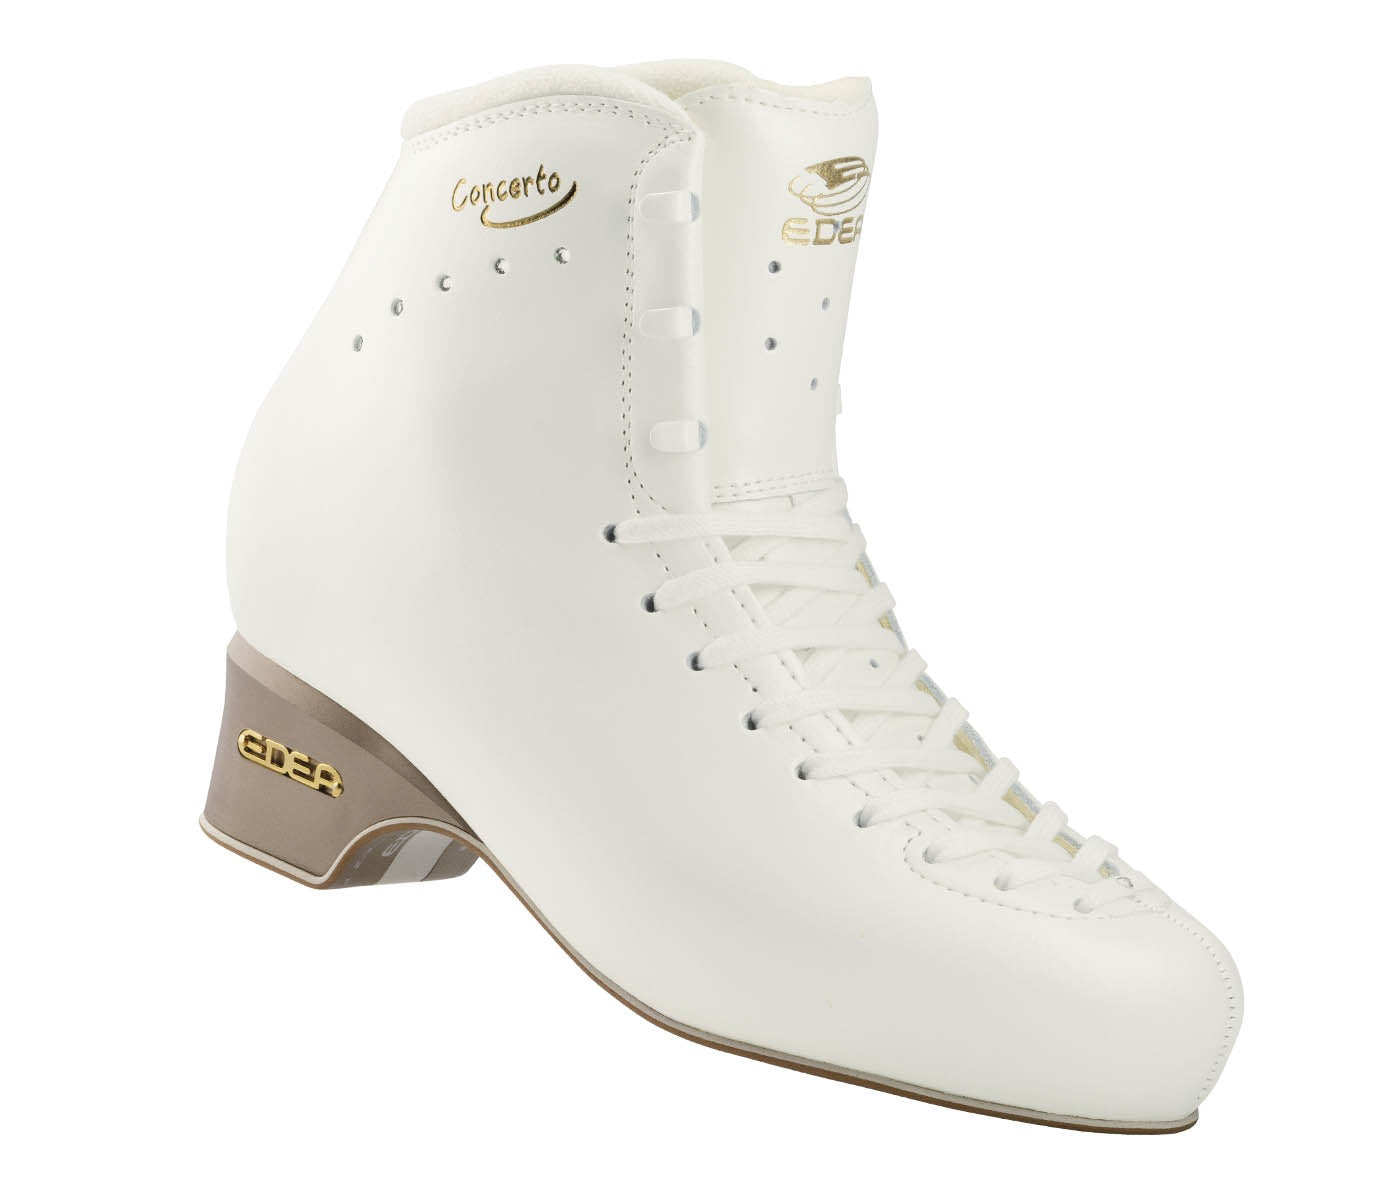 Edea Concerto Boot Only in Ivory. Junior Sizes 225 - 255